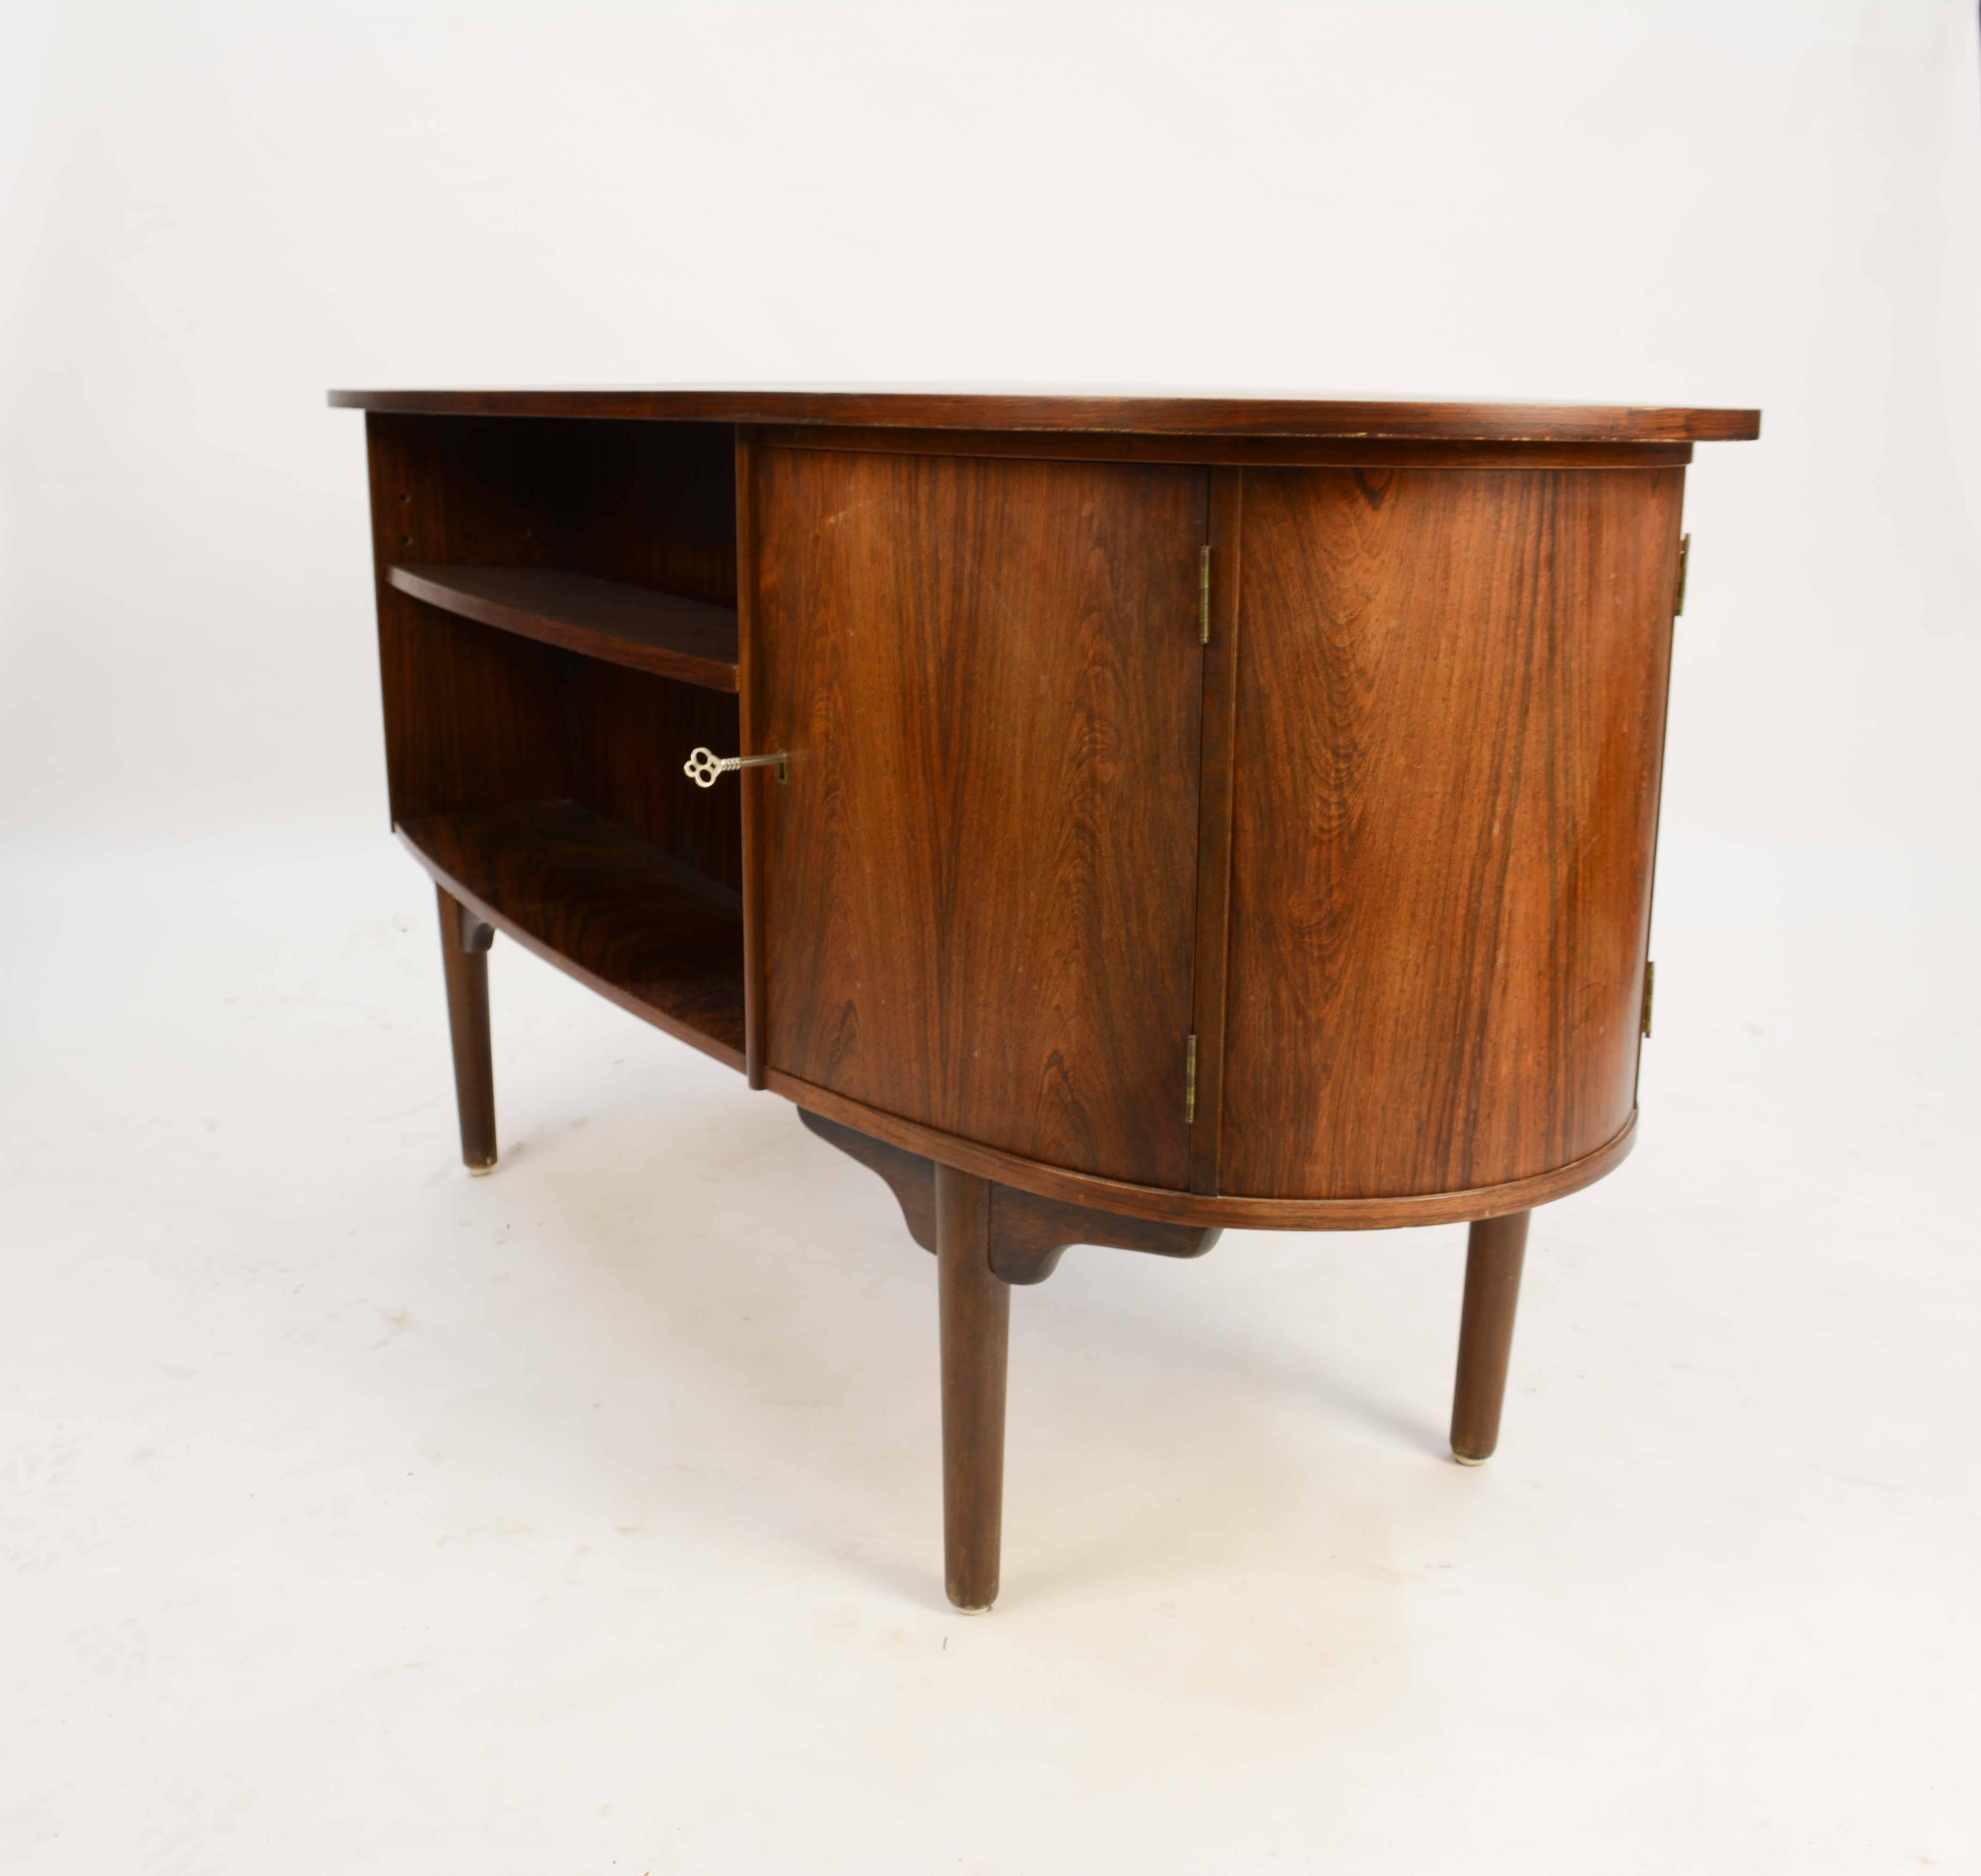 Magnificent and Sensual Kai Kristensen Rosewood Executive Desk from Denmark 3